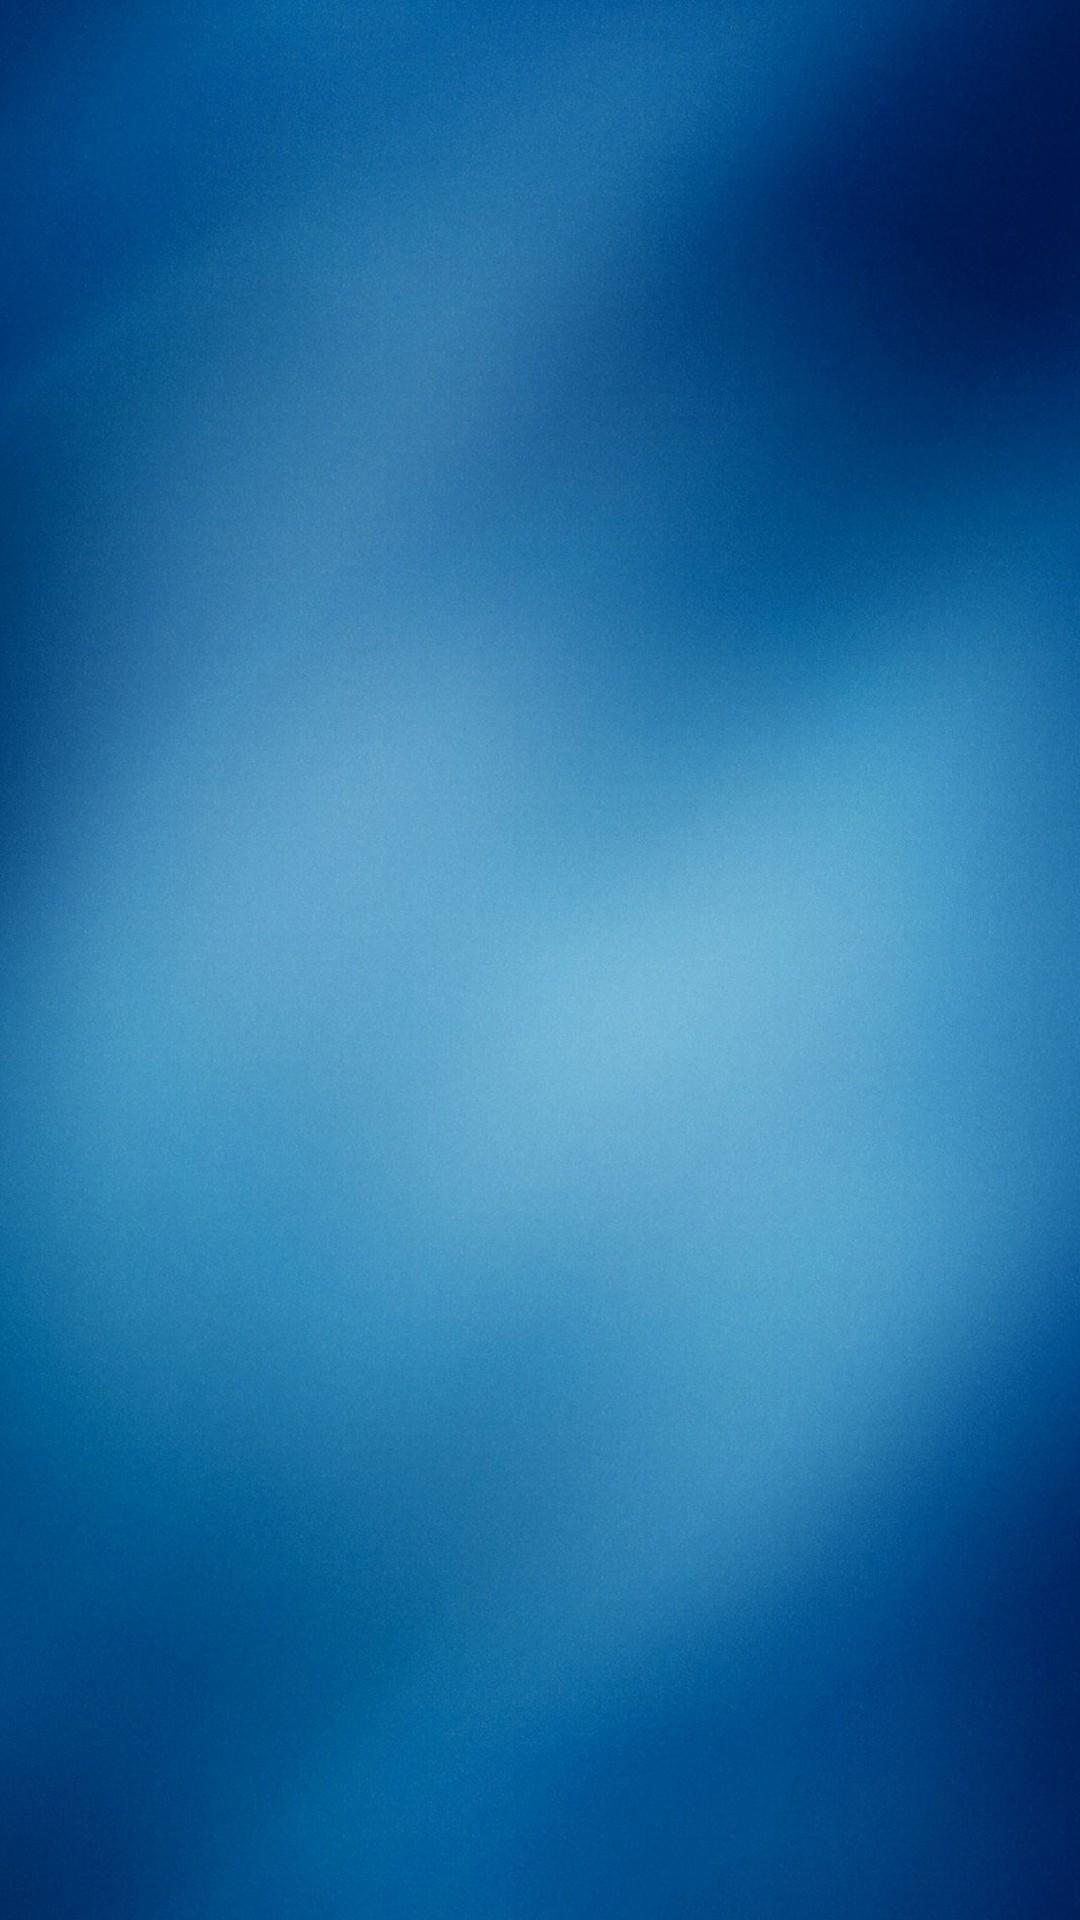 Dark Blue Fading To Light Blue Wallpapers